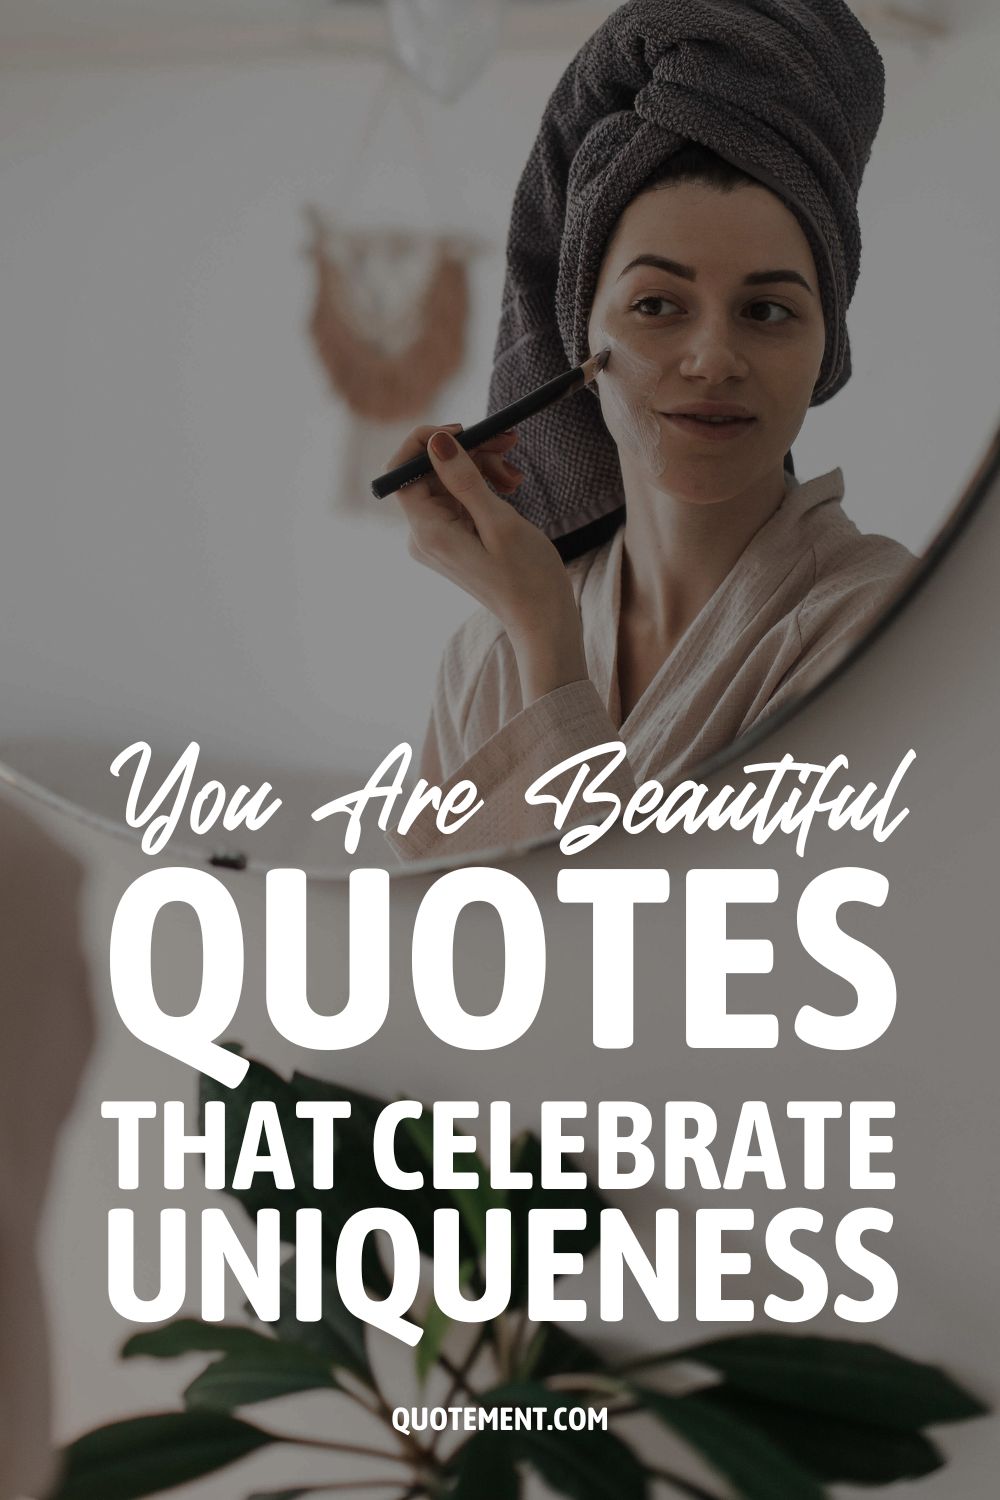 190 You Are Beautiful Quotes That Celebrate Uniqueness 